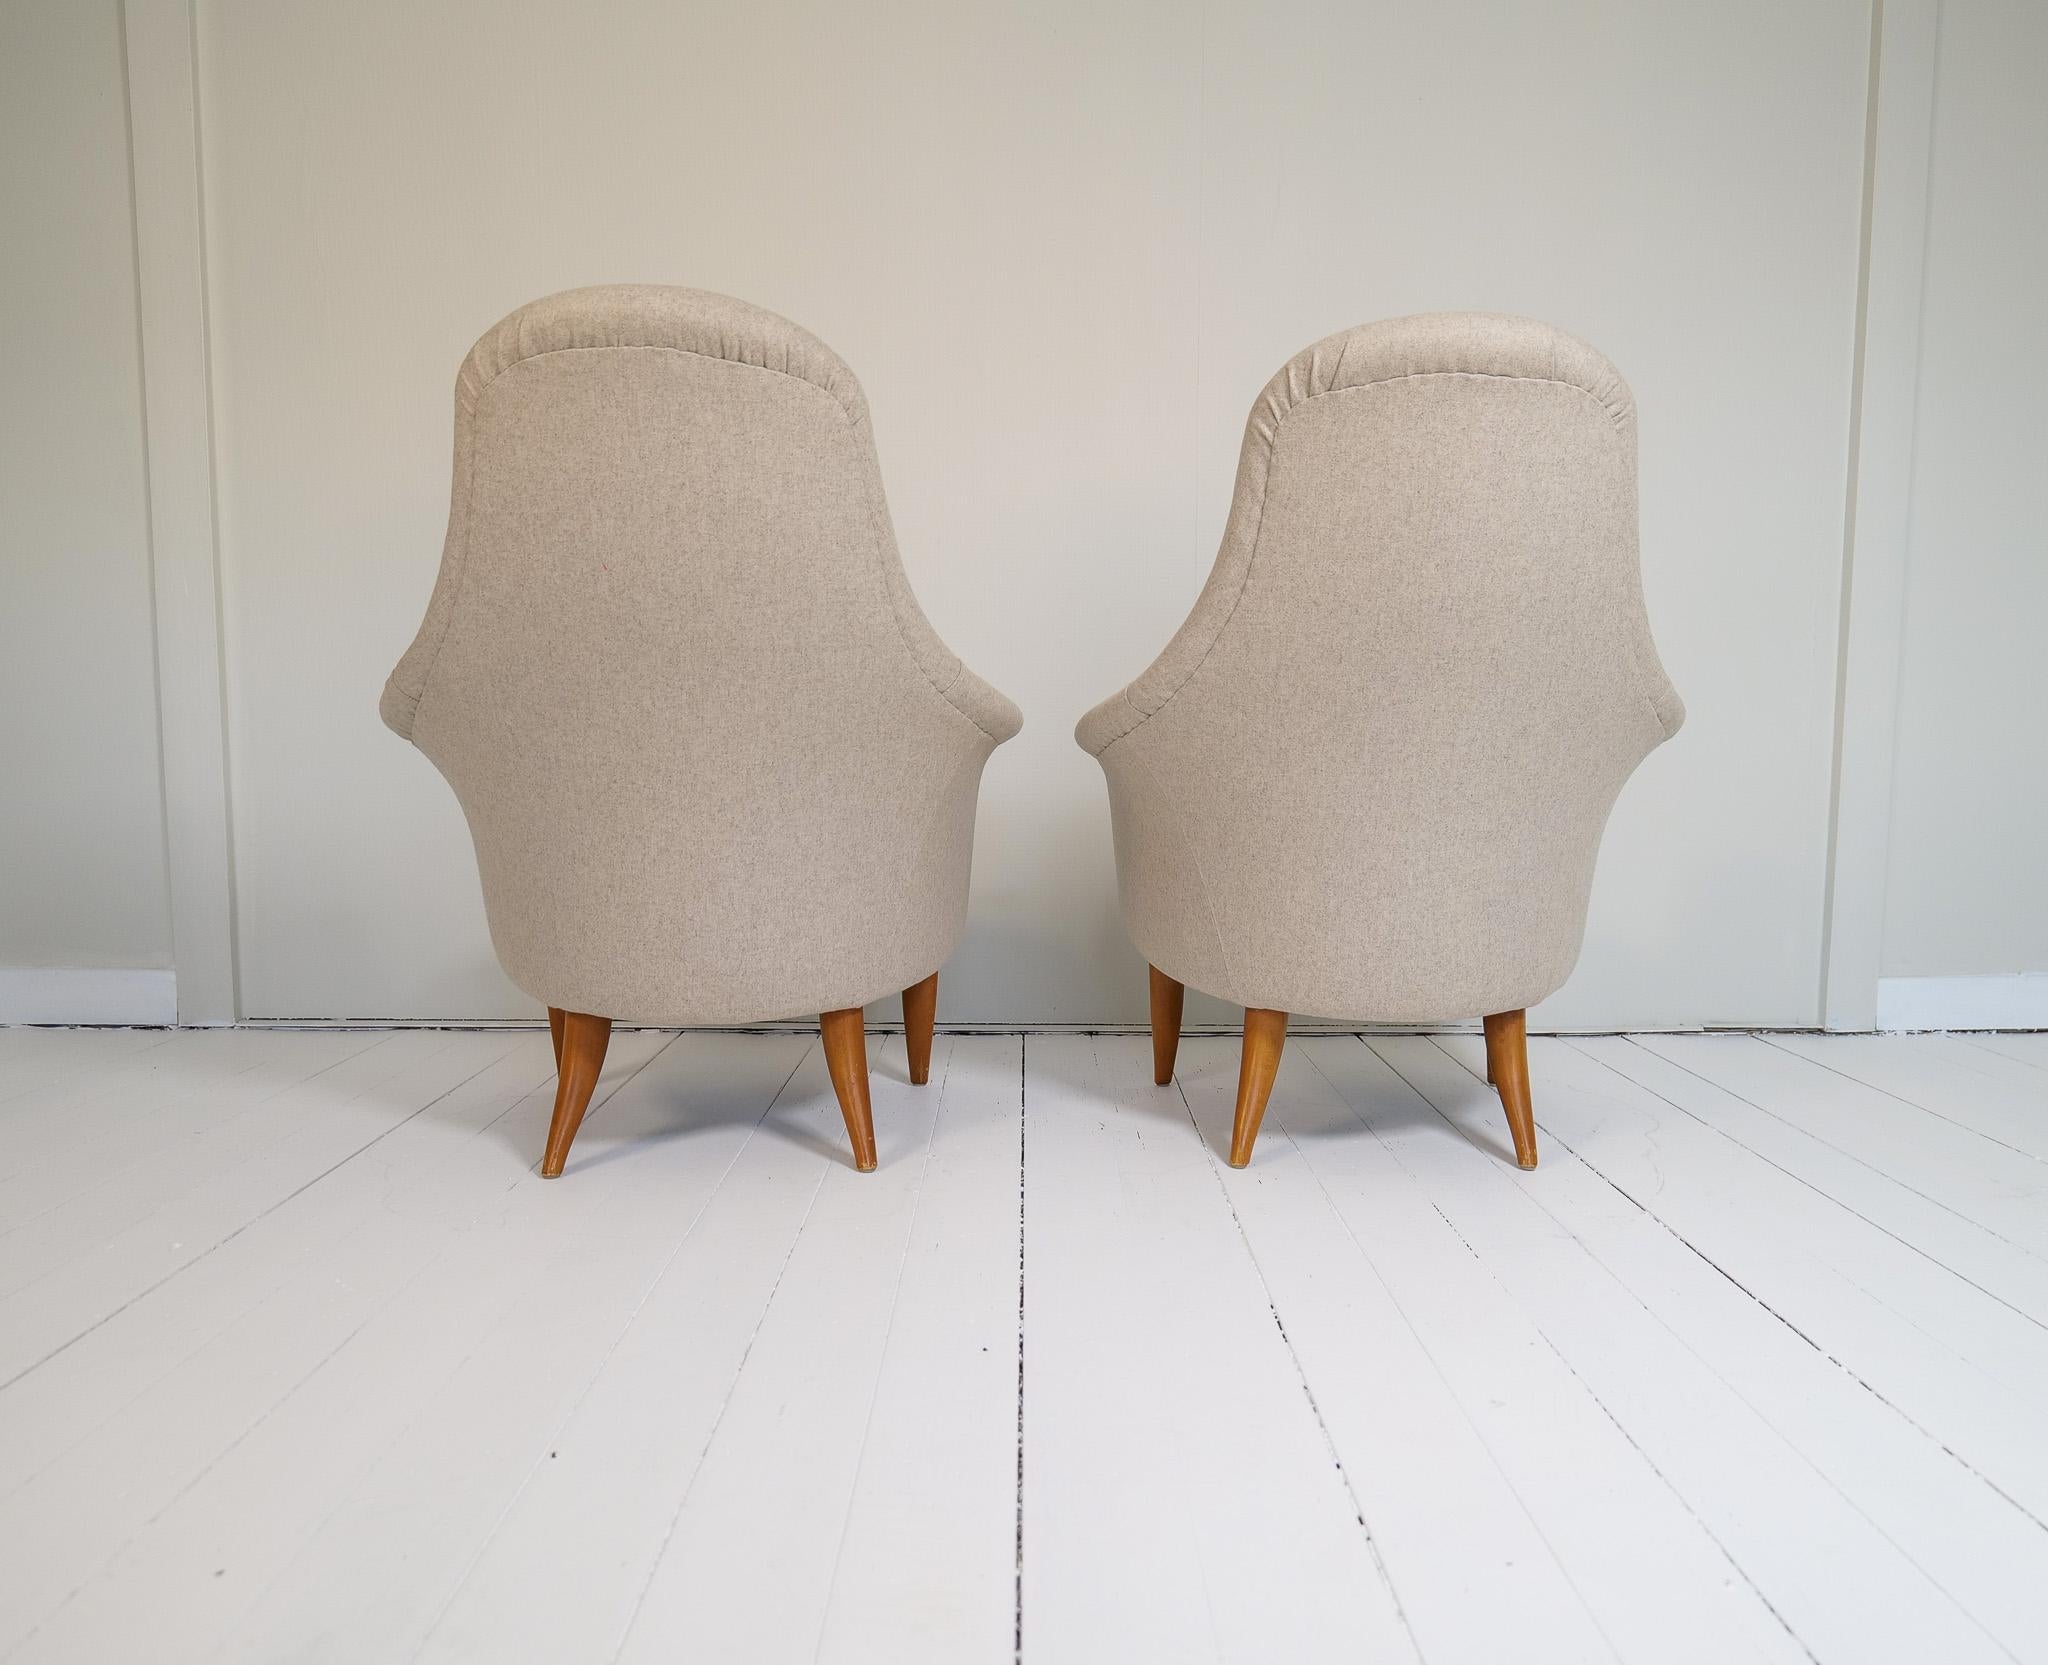 Midcentury Modern Big Adam Lounge Chairs NK, Sweden, 1950s For Sale 6